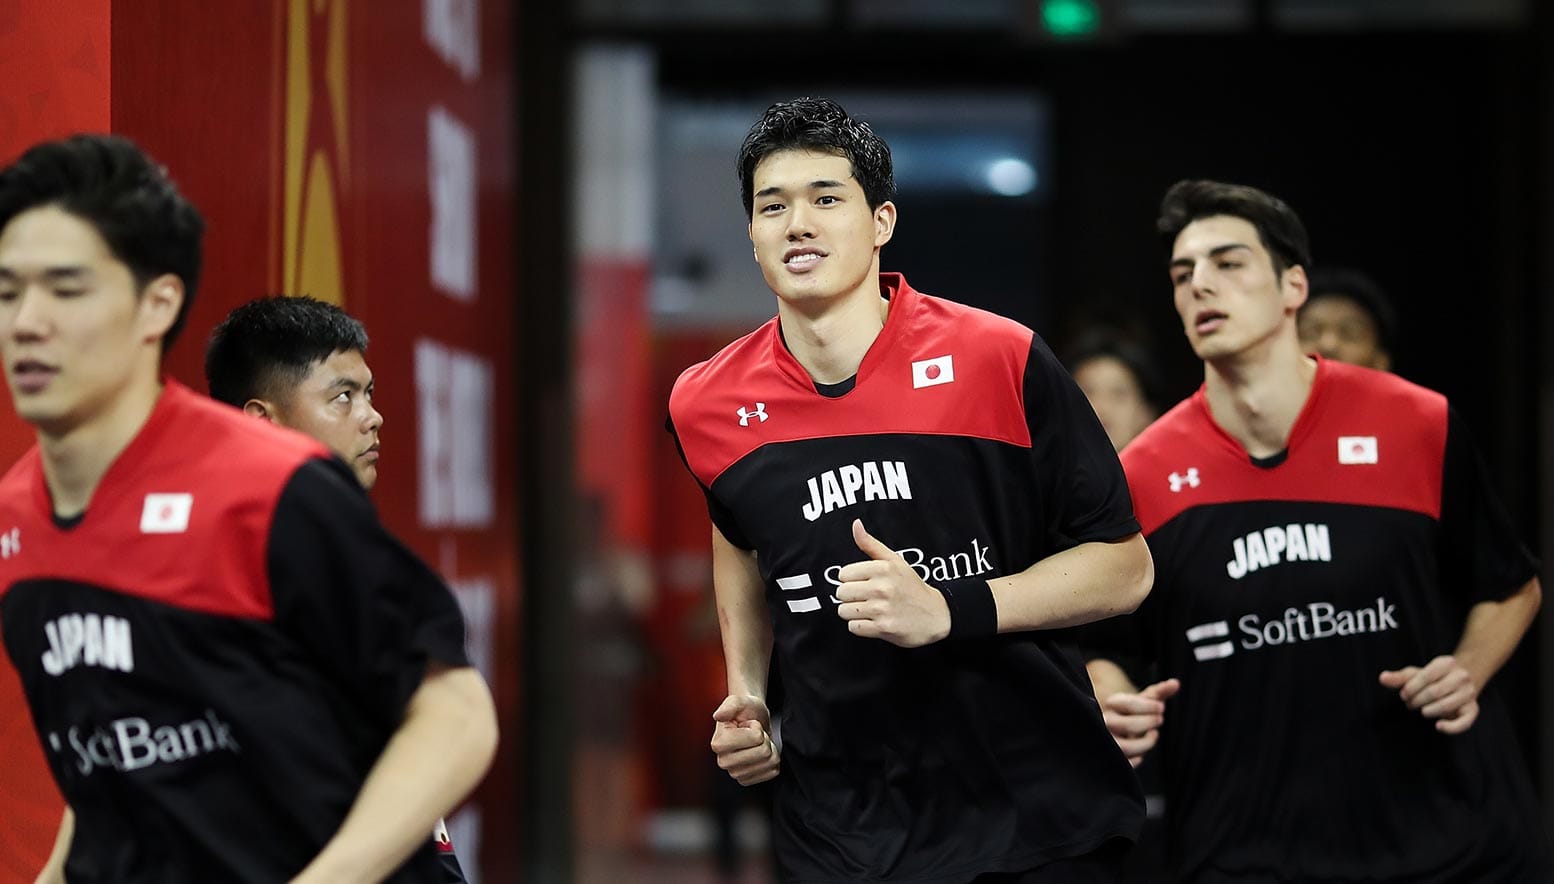 MikeCheck: As Grizz teammates advance in FIBA World Cup, Watanabe and Japan build for 2020